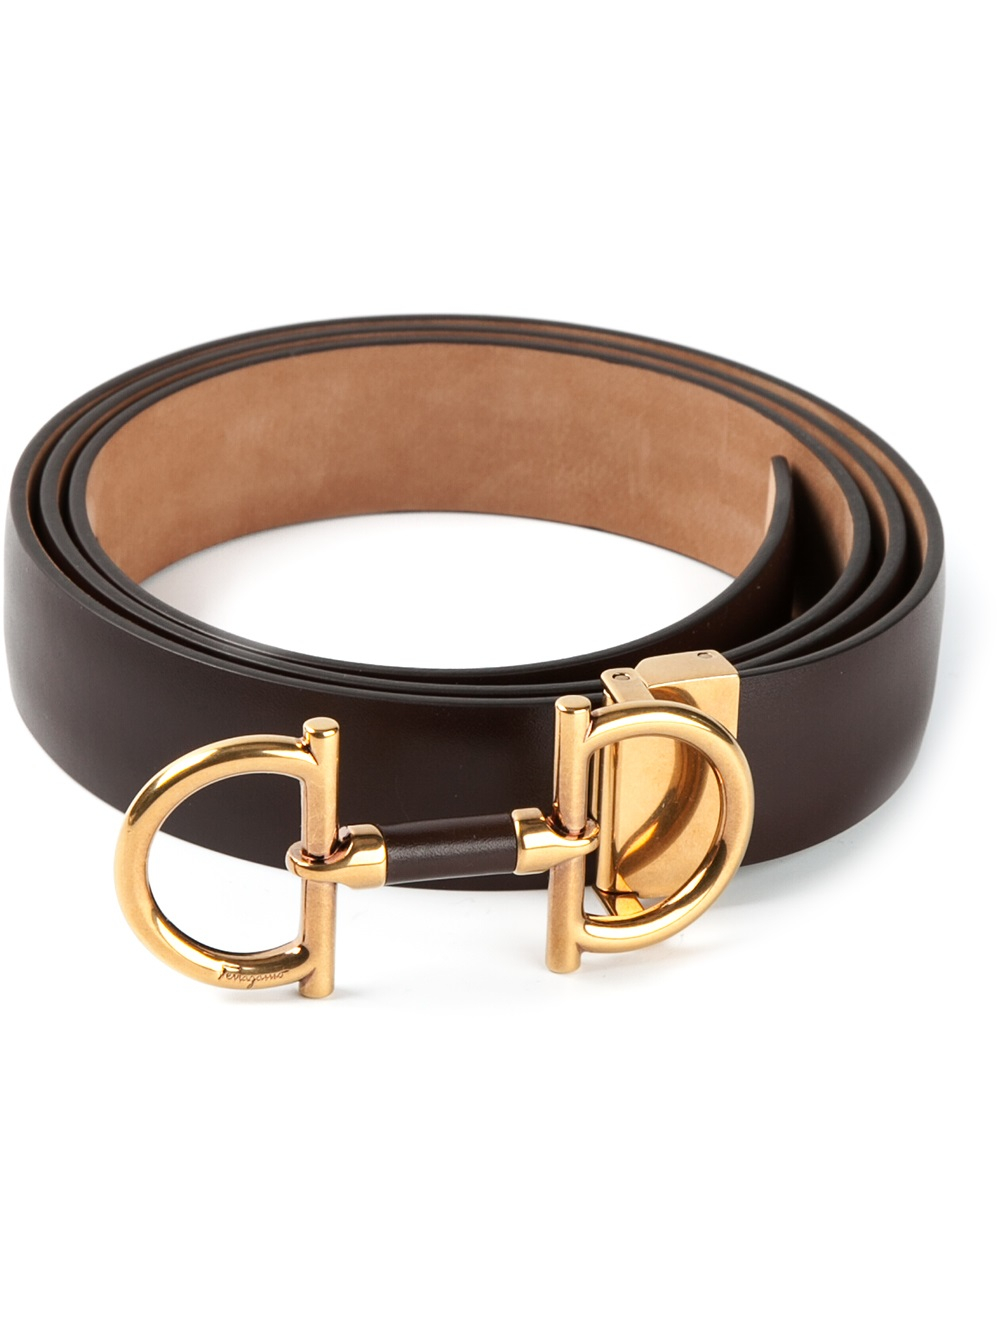 Belts With Buckles For Men | IQS Executive